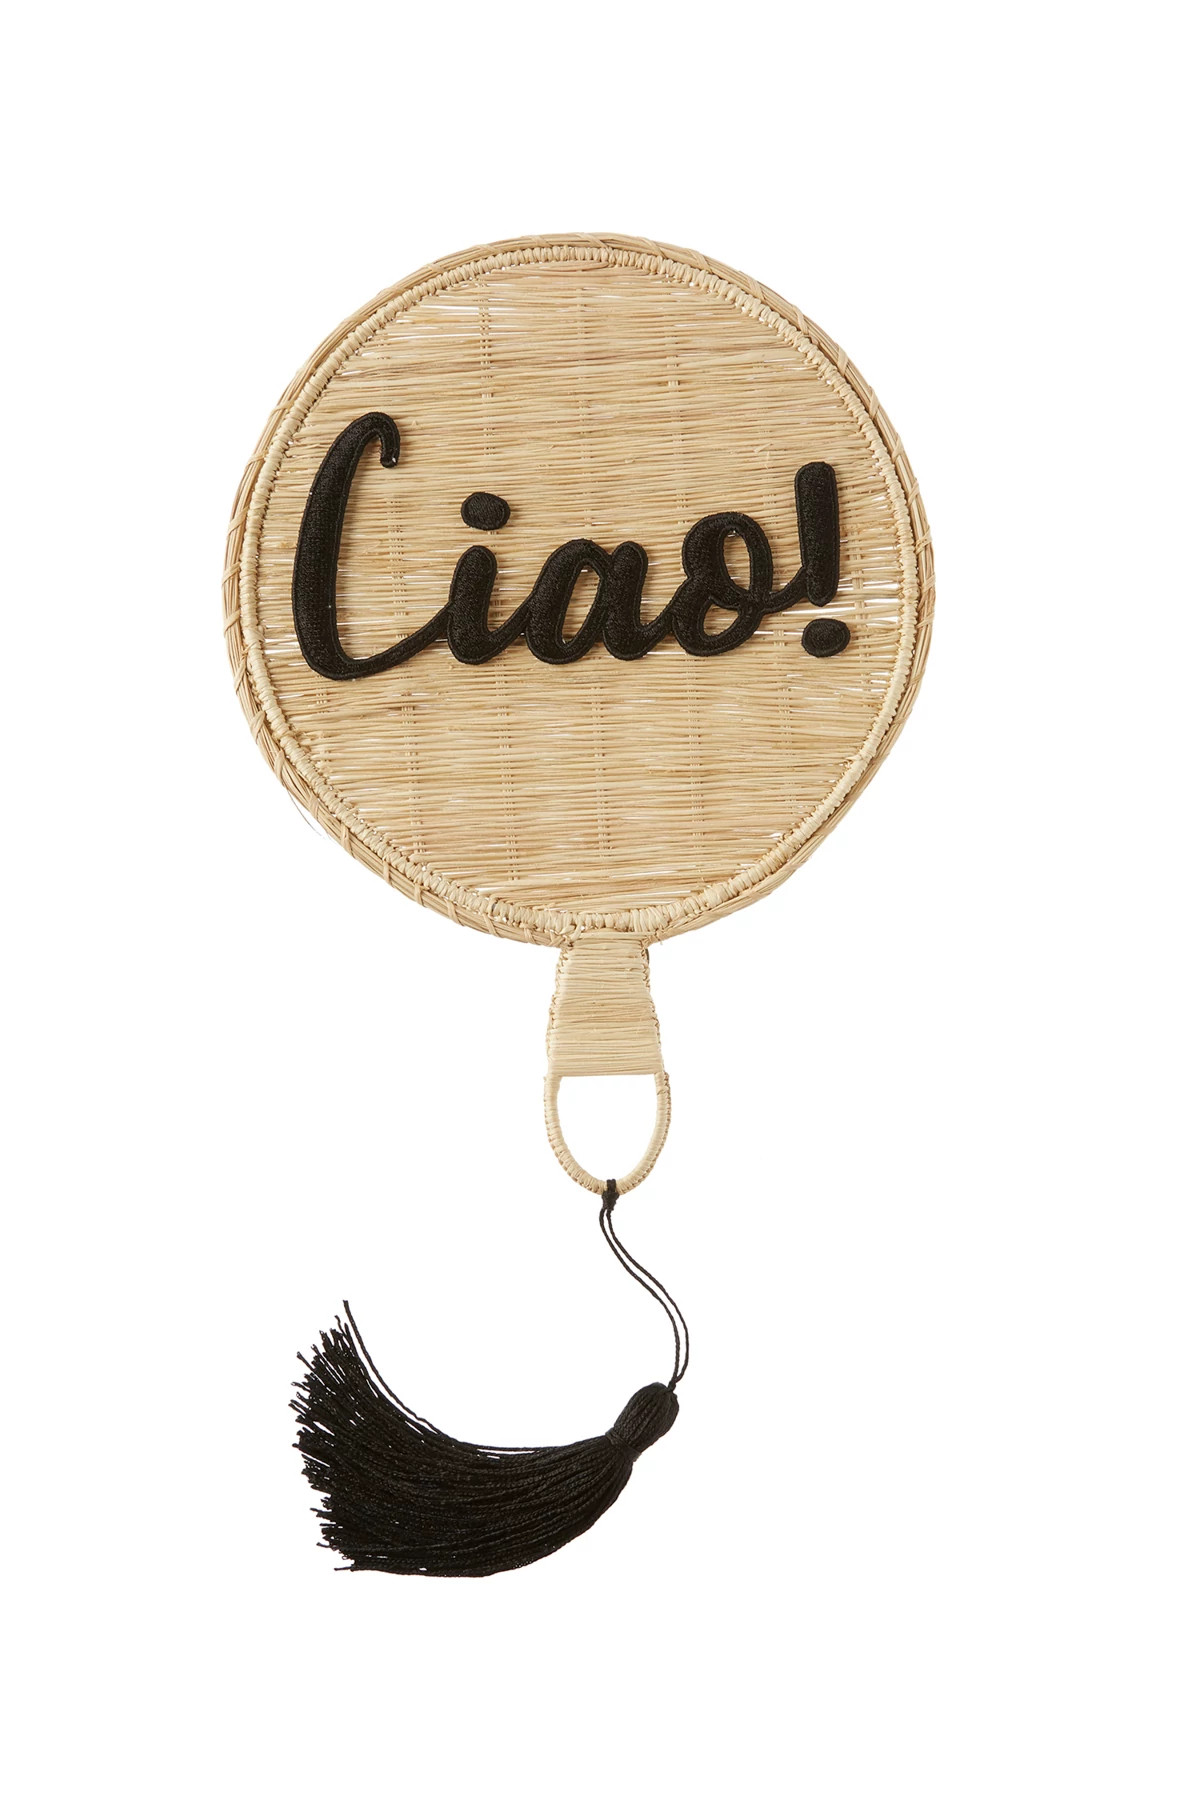 NATURAL Embroidered CIAO Appliqué Straw Fan image number 1